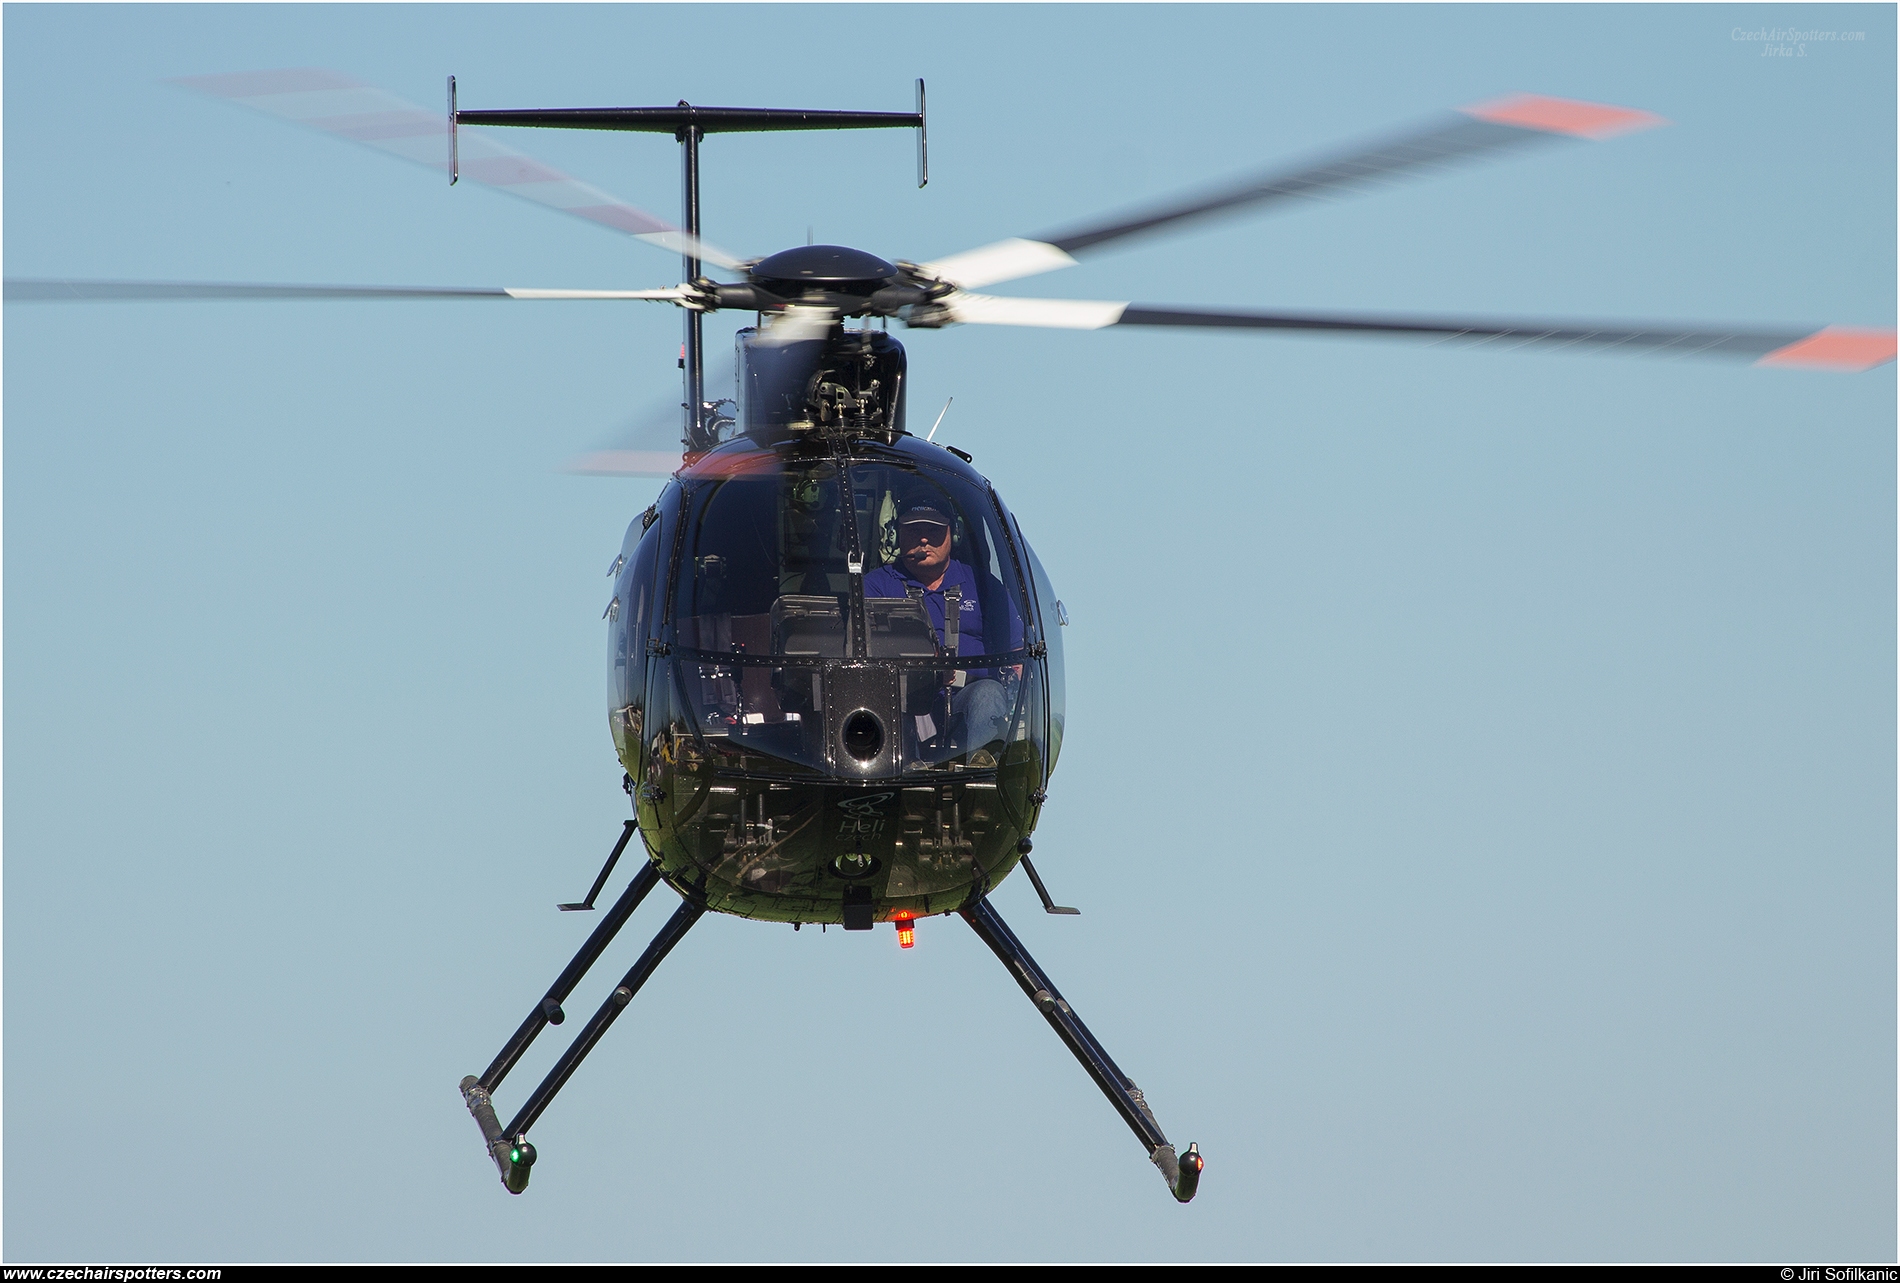 EUROPEAN AIR SERVICES – MD Helicopters MD 500E (369E) OK-HSO